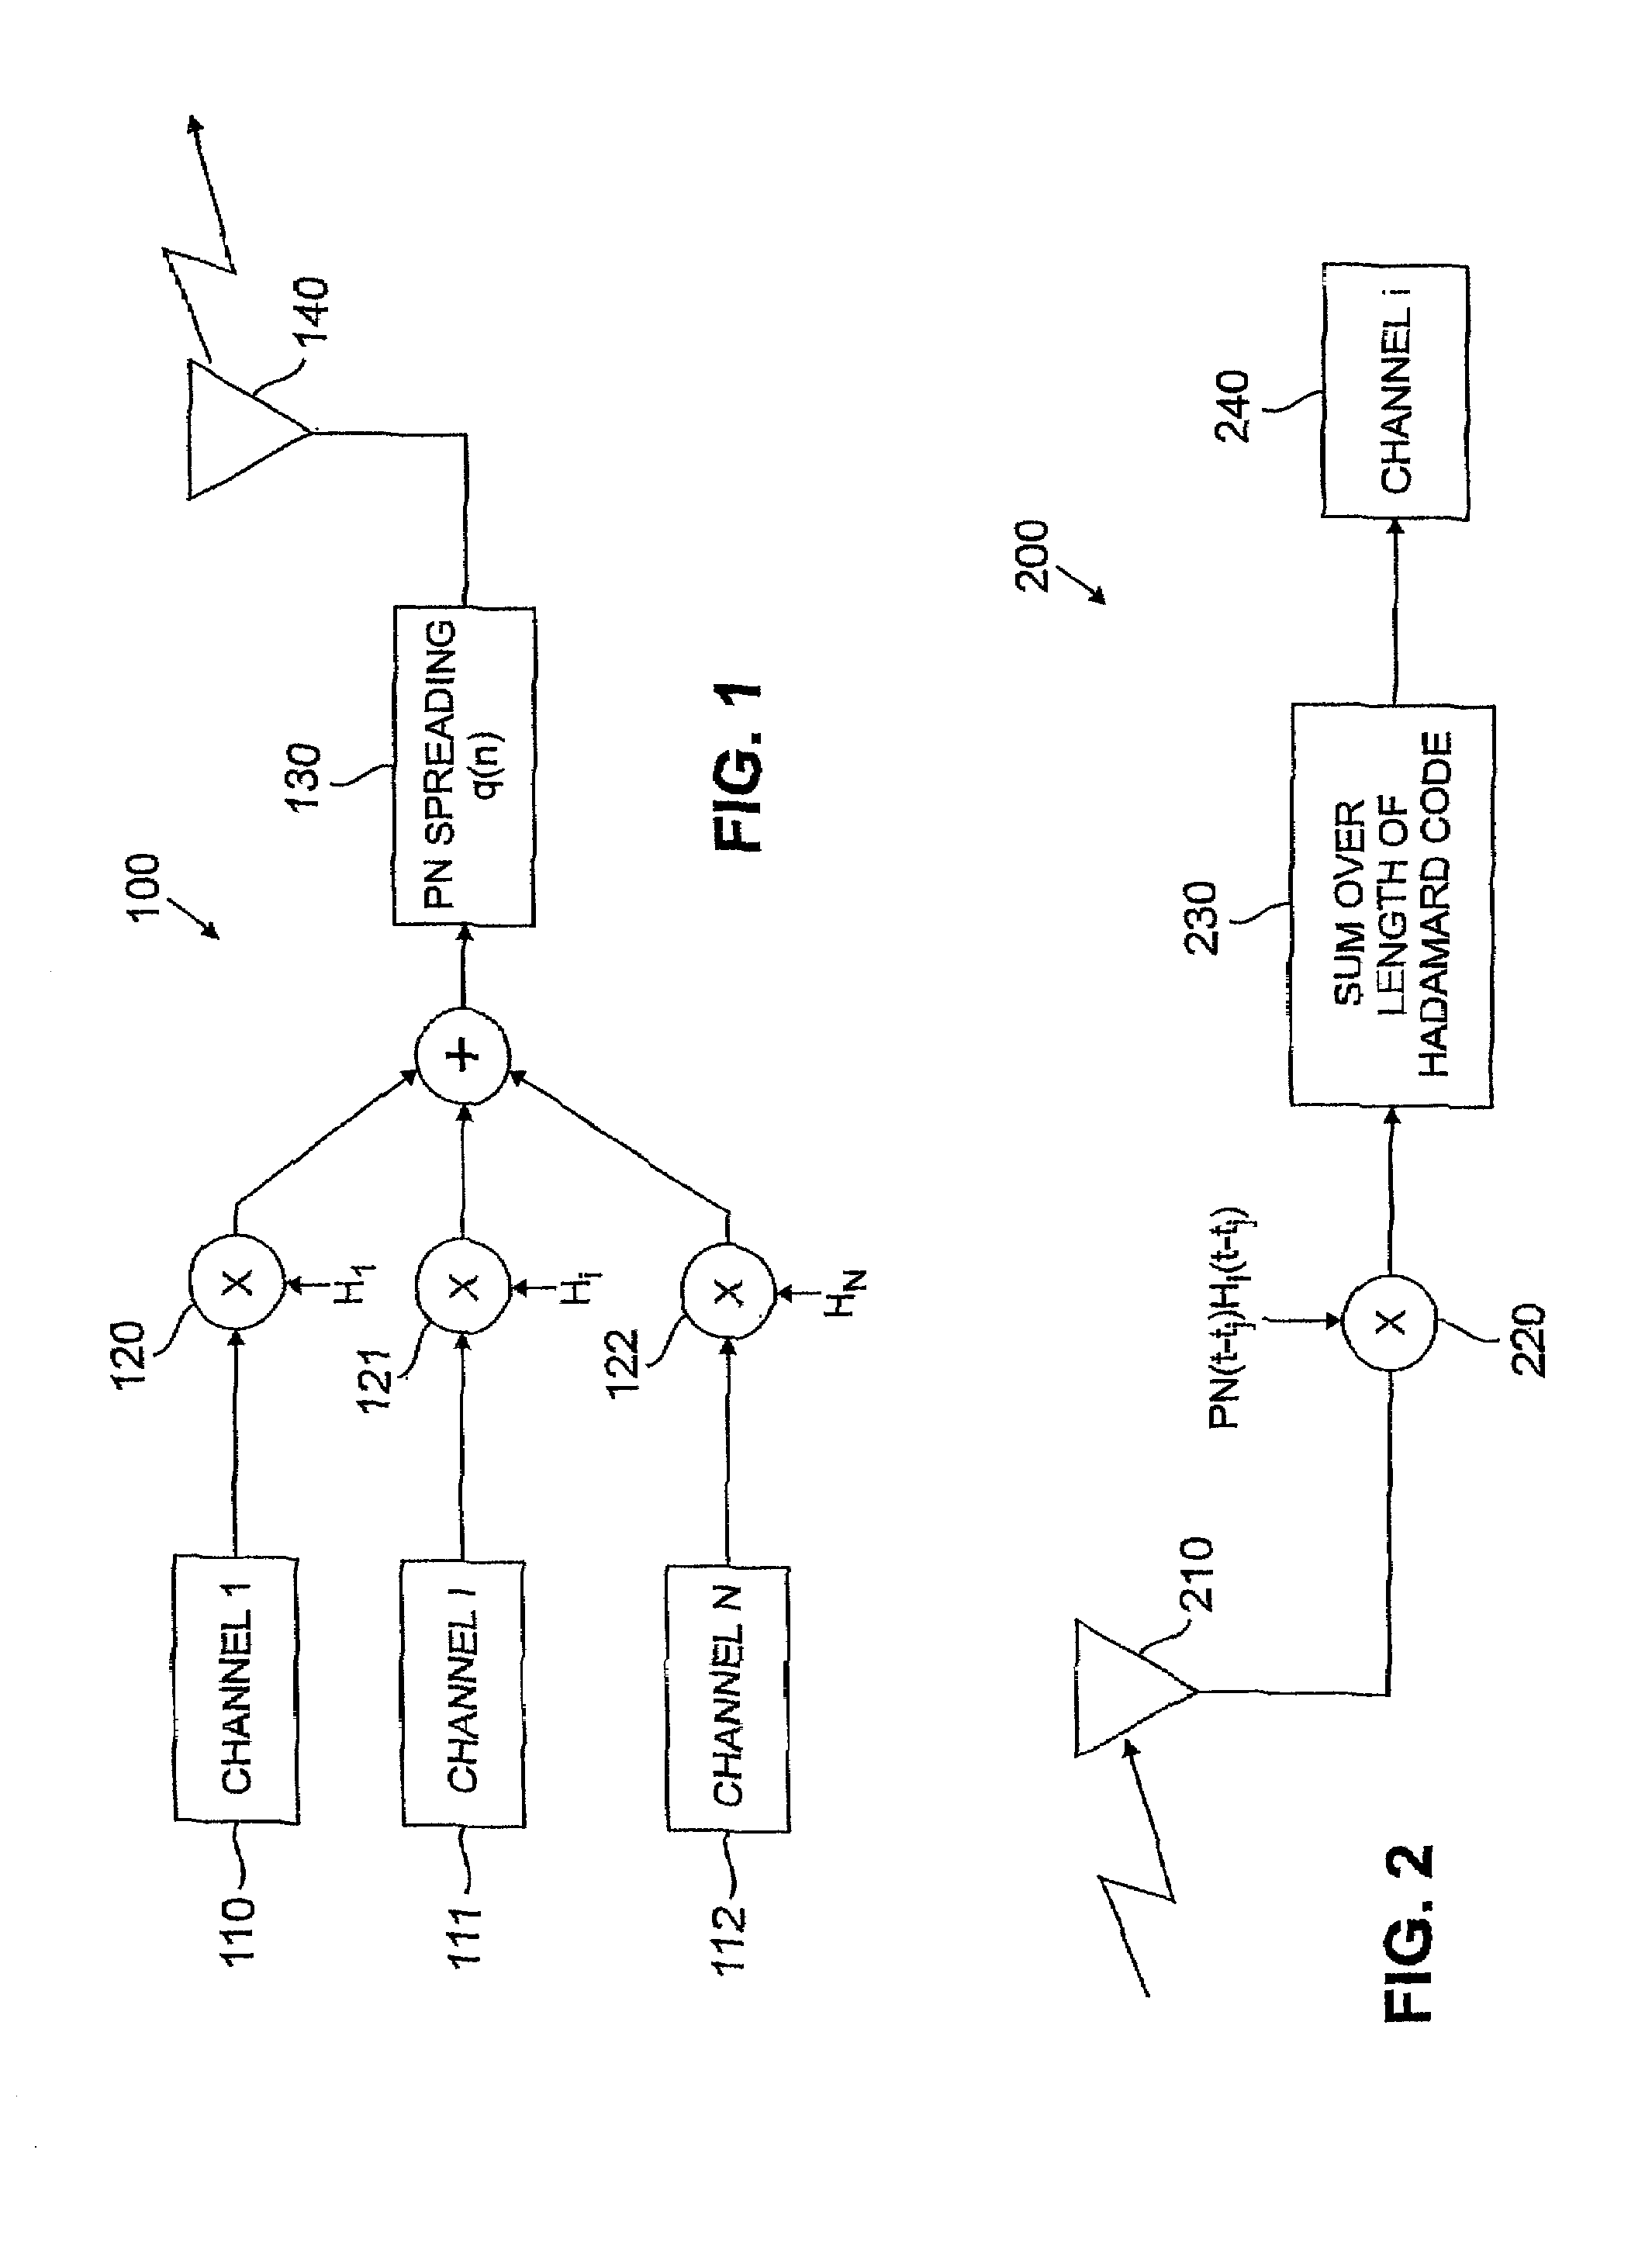 Method and apparatus for achieving channel variability in spread spectrum communication systems